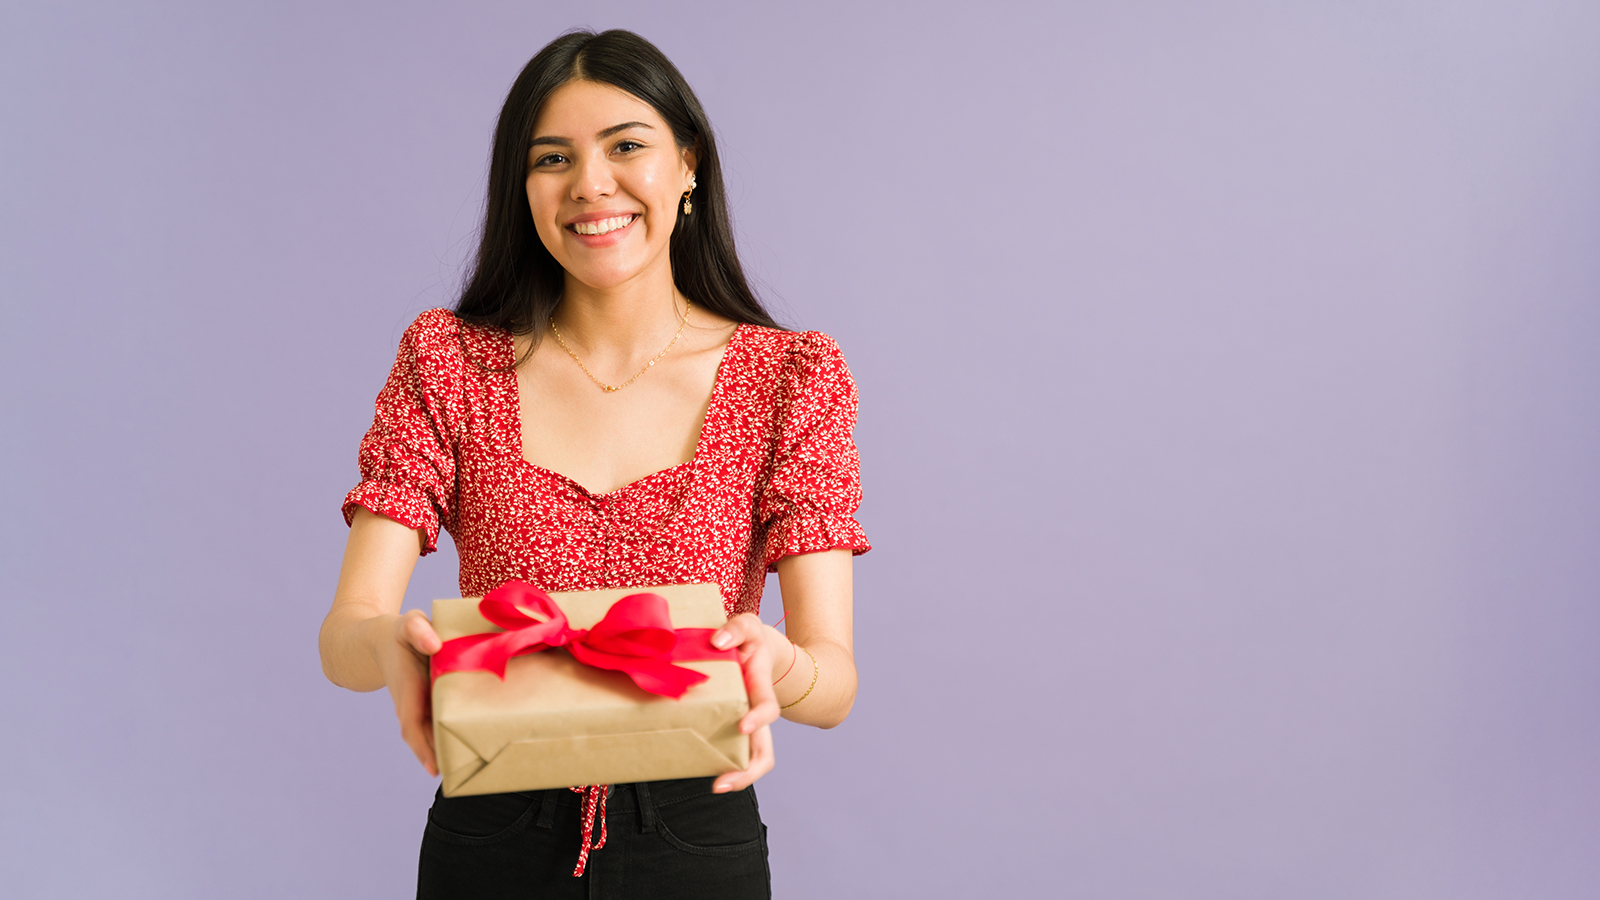 Loving latin young woman giving a beautiful birthday present while smiling against a purple background